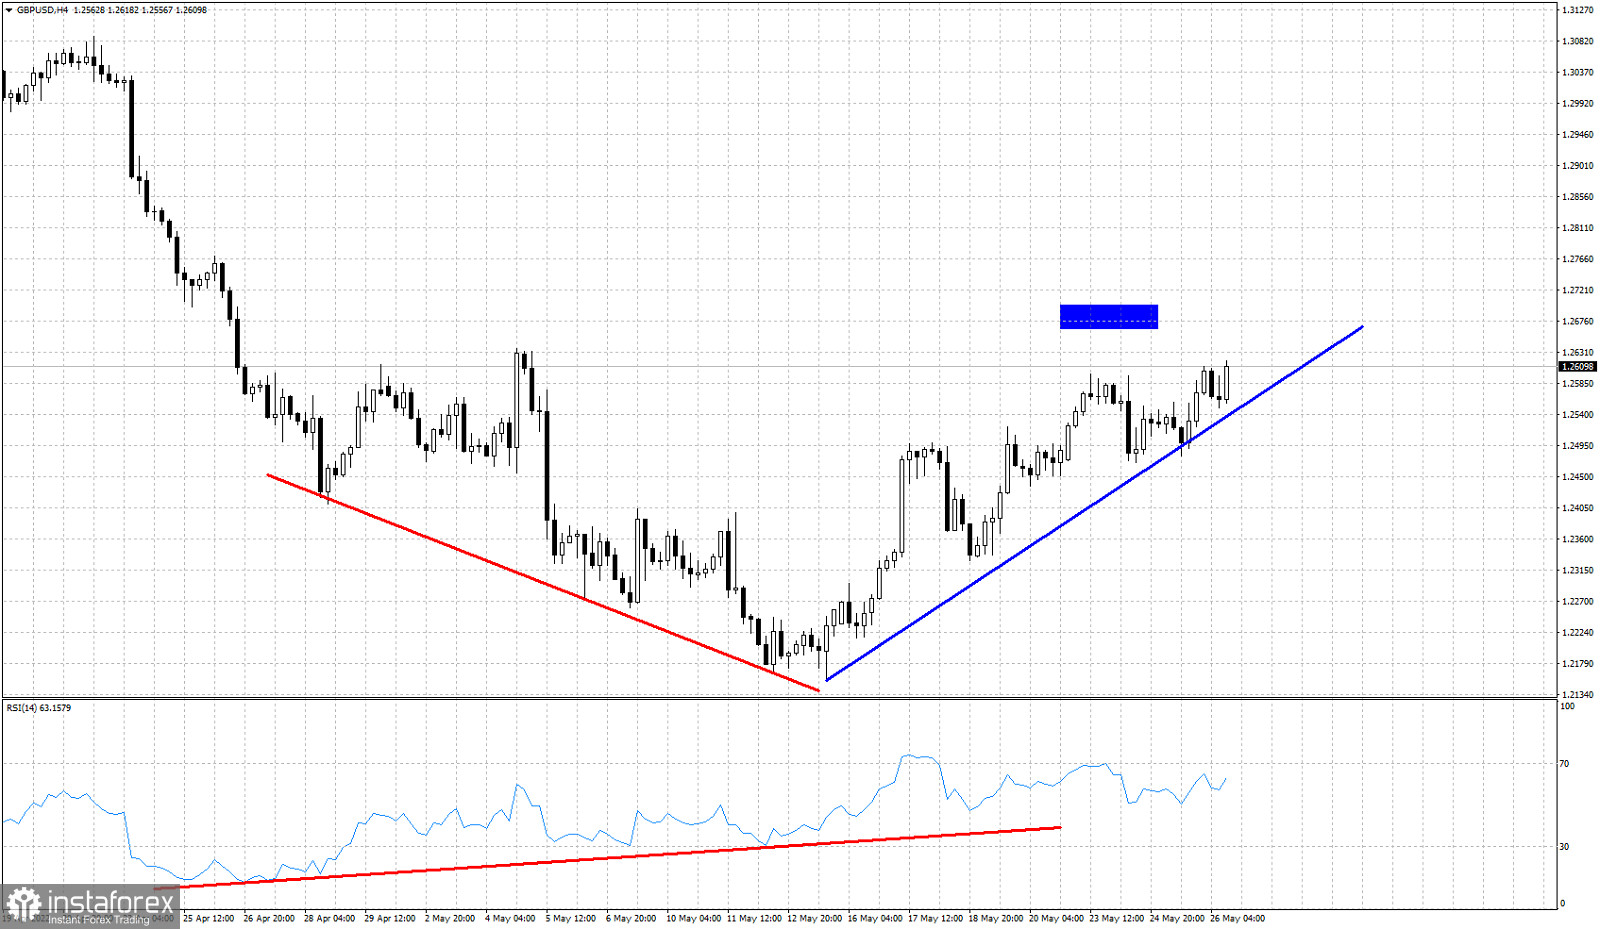 GBPUSD makes higher highs approaching our short-term target area.